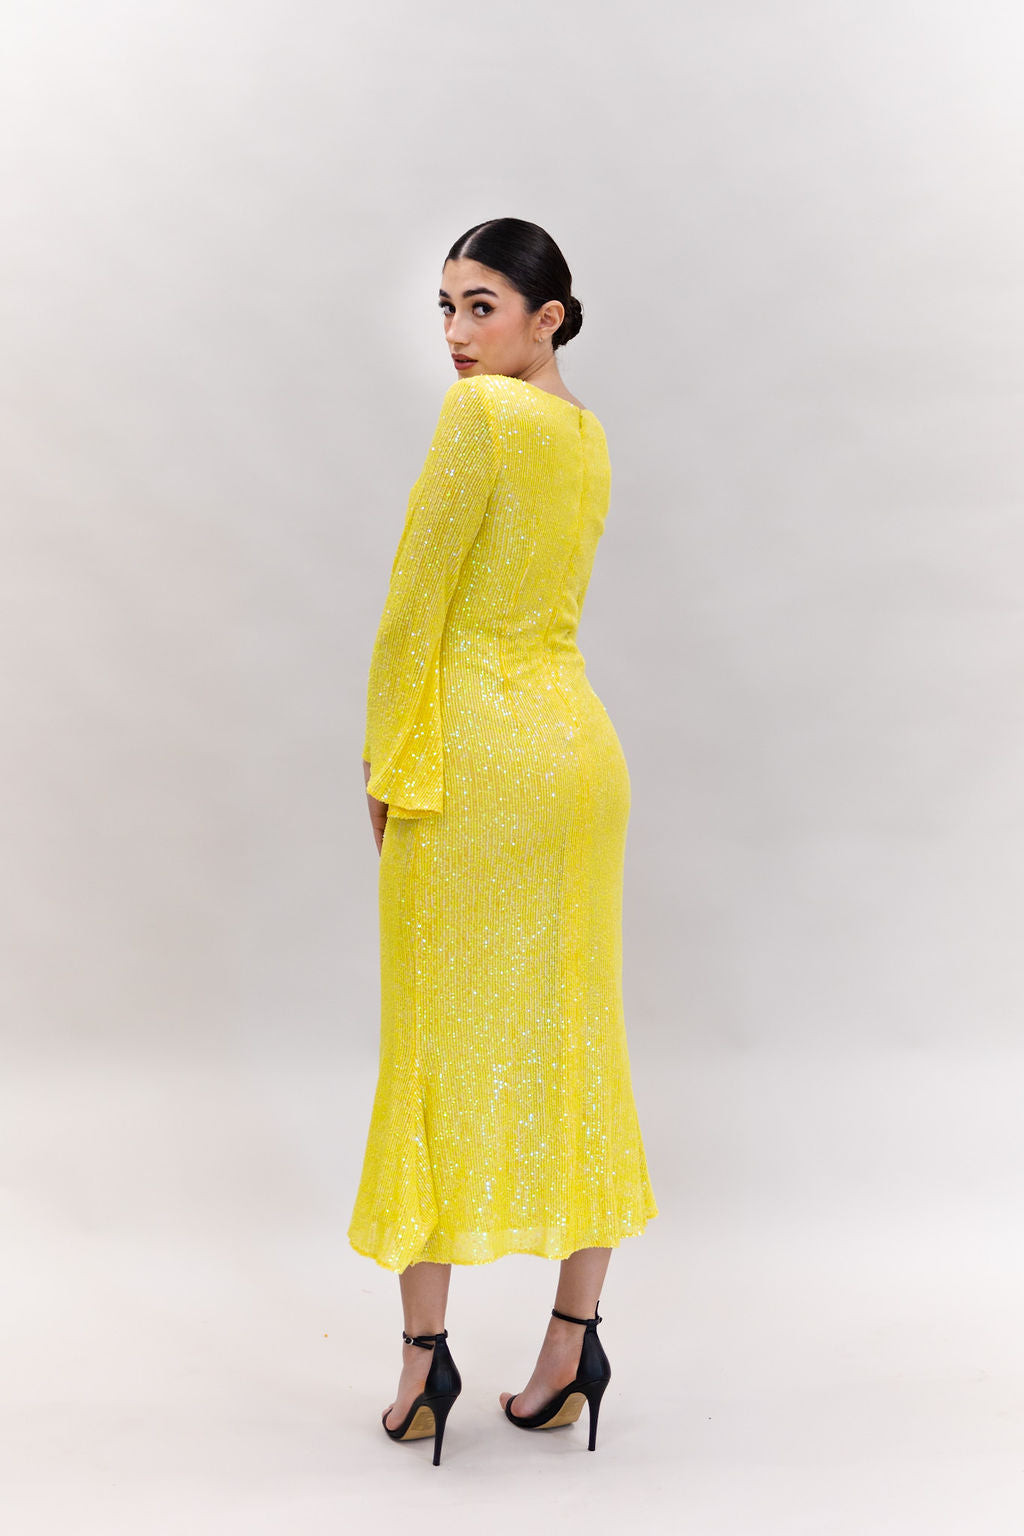 THE YELLOW SEQUIN DRESS